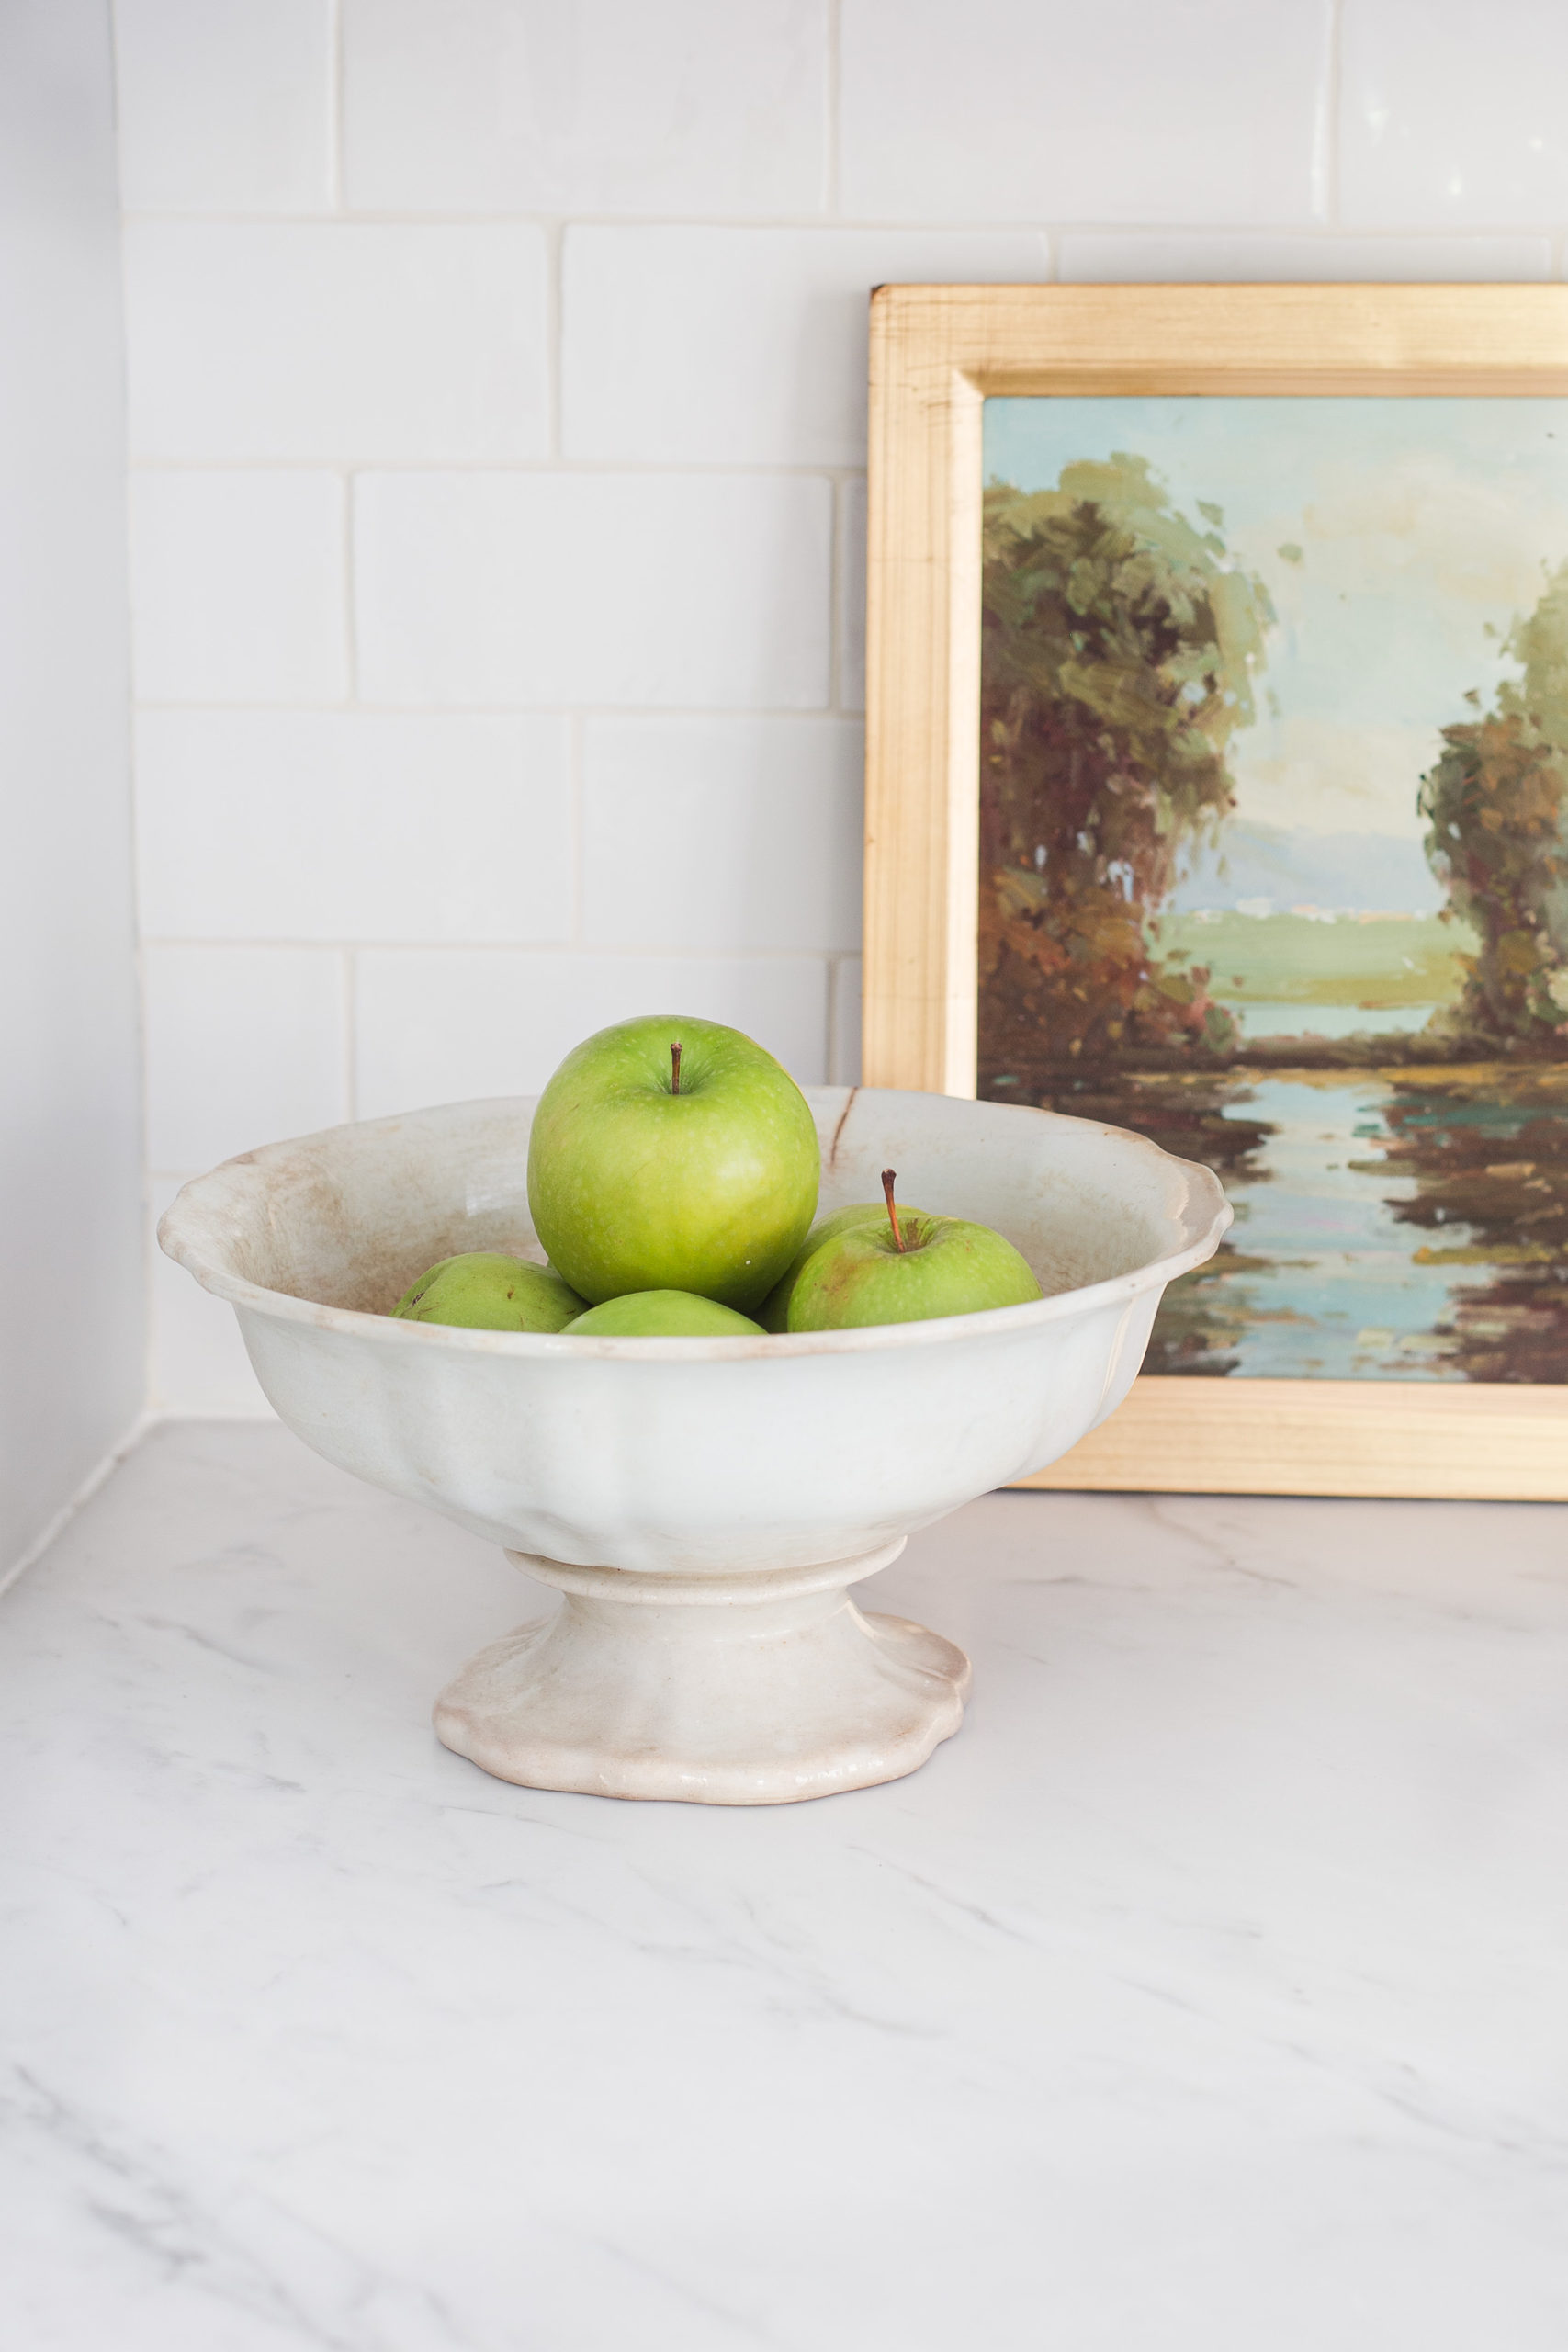 bowl of green apples sitting on a kitchen countertop and white subway tile backsplash